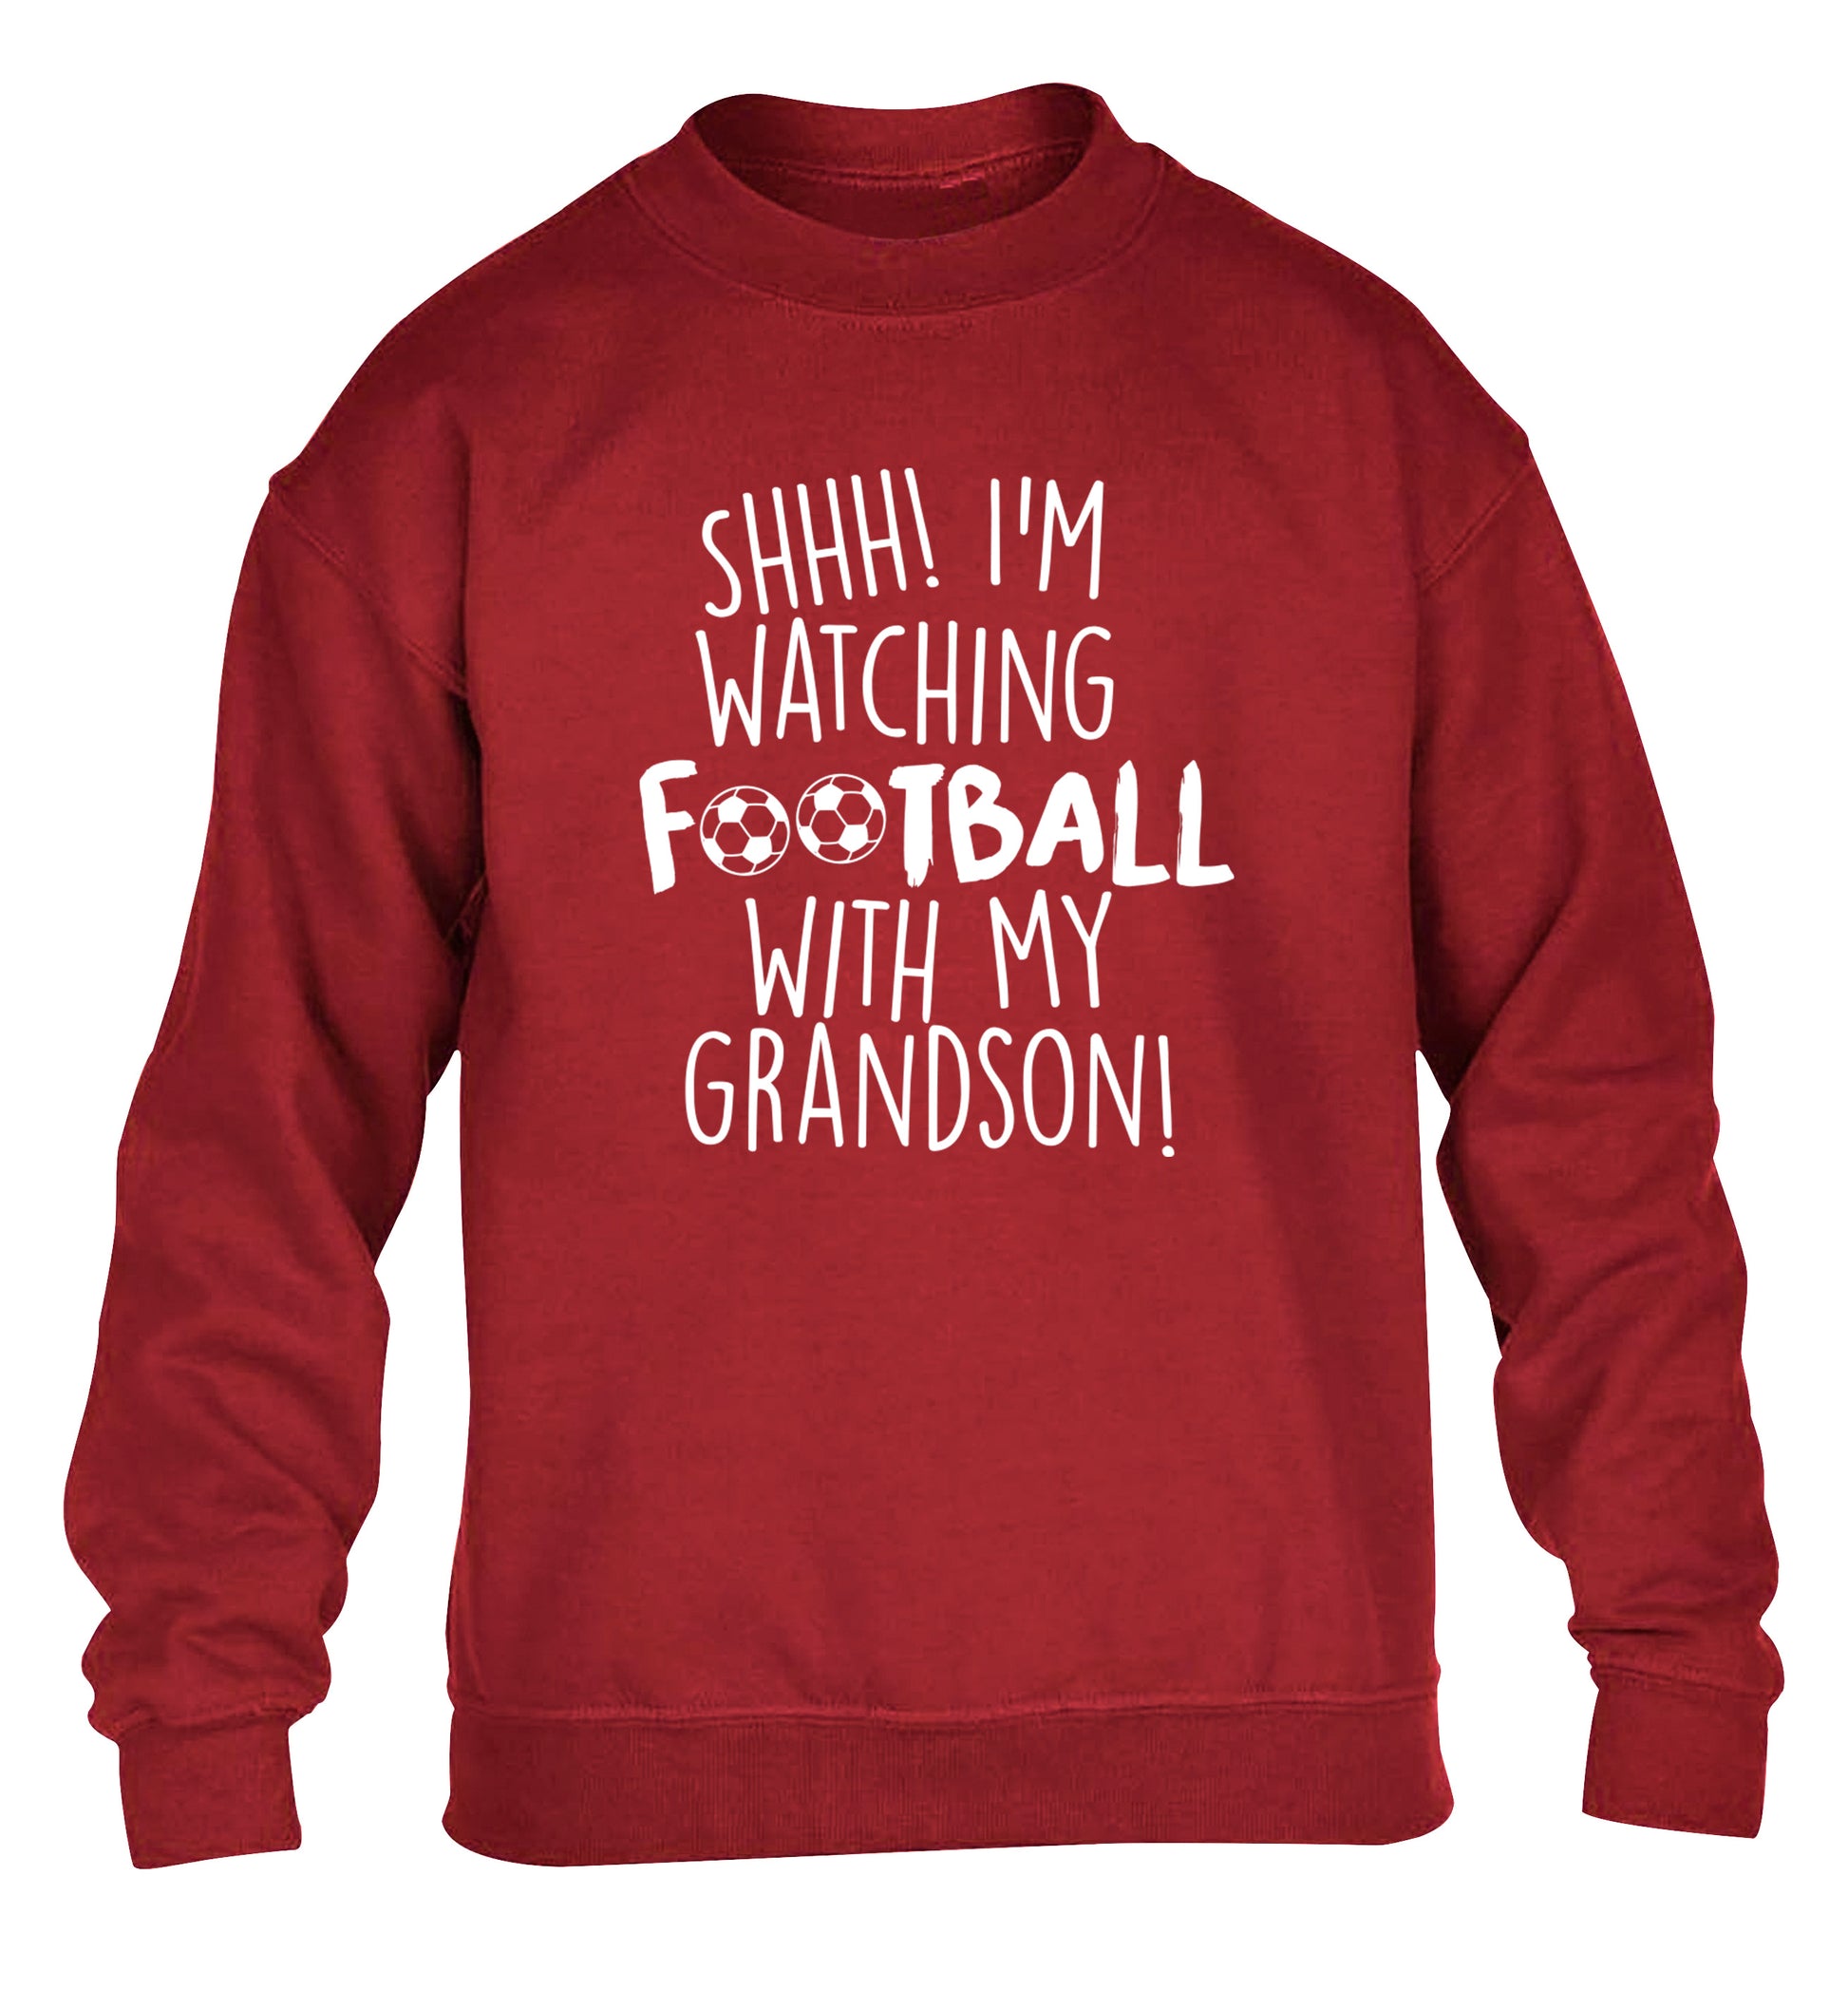 Shhh I'm watching football with my grandson children's grey sweater 12-14 Years